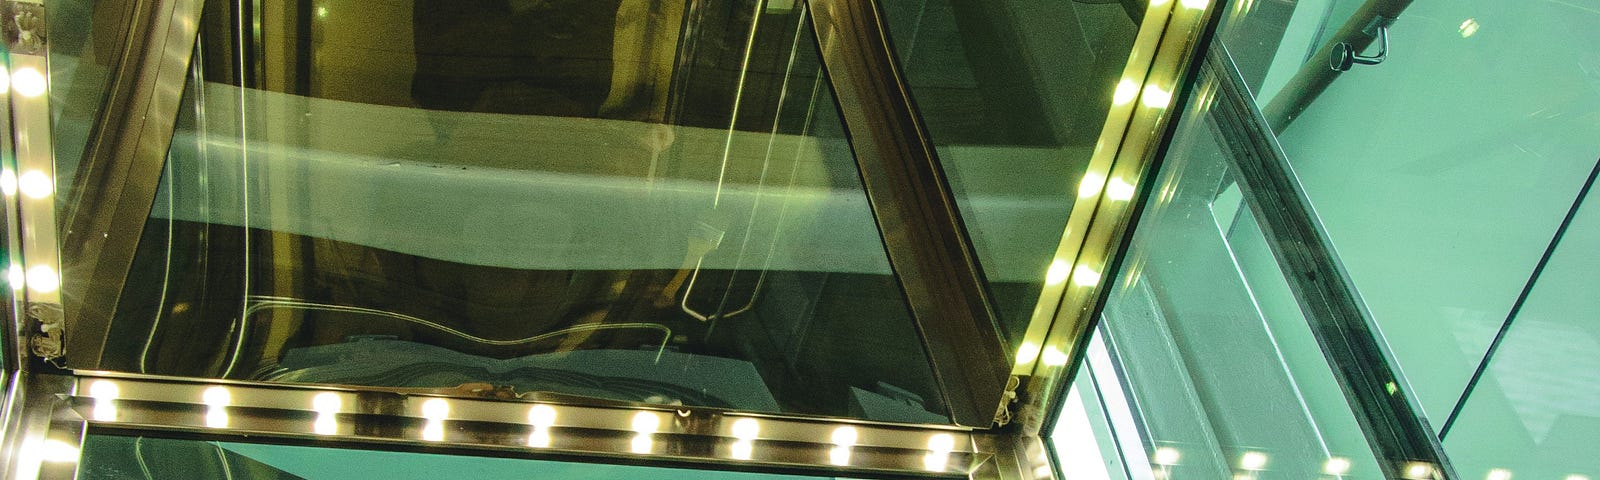 A woman, dressed in stylish leather with round glasses, looks up in an elevator at a reflection of herself on the ceiling.